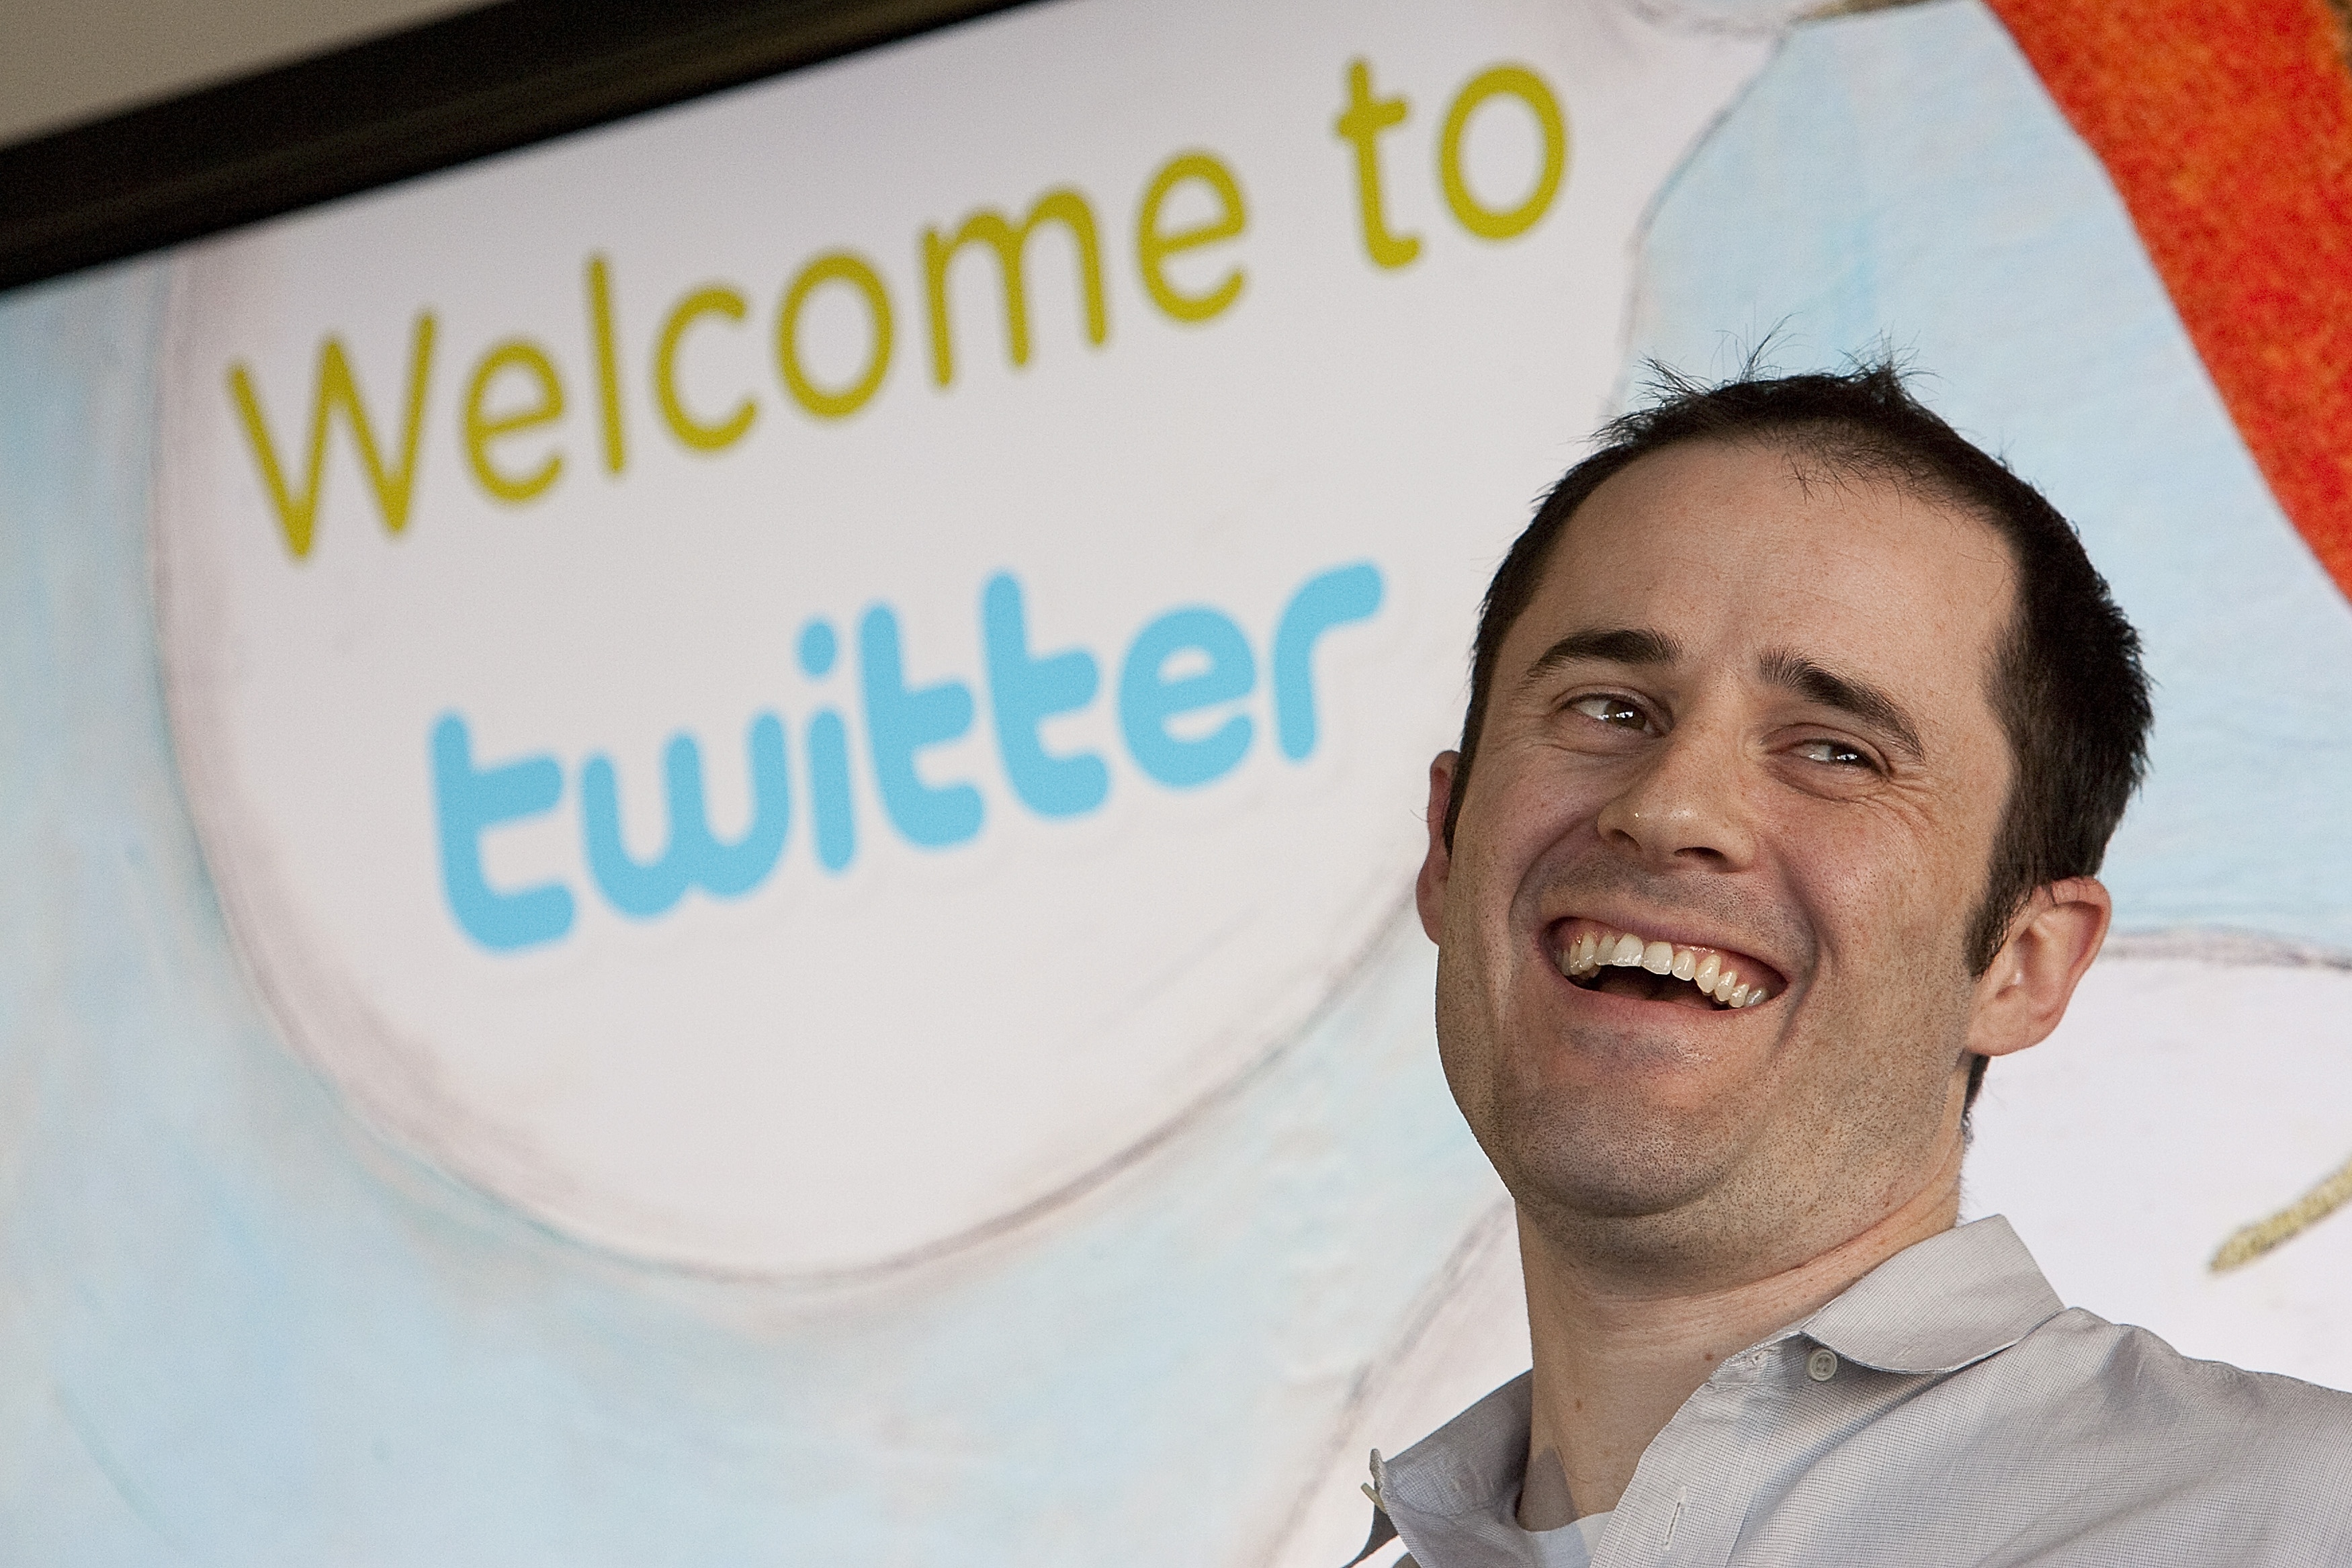 SAN FRANCISCO - MARCH 10: Twitter co-founder and CEO Evan Williams speaks at Twitter headquarters March 10, 2009 in San Francisco, California. Twitter, the new social networking service that allows users to send out and also read text message updates from others, is fast becoming very popular all over the world. (Photo by David Paul Morris/Getty Images)